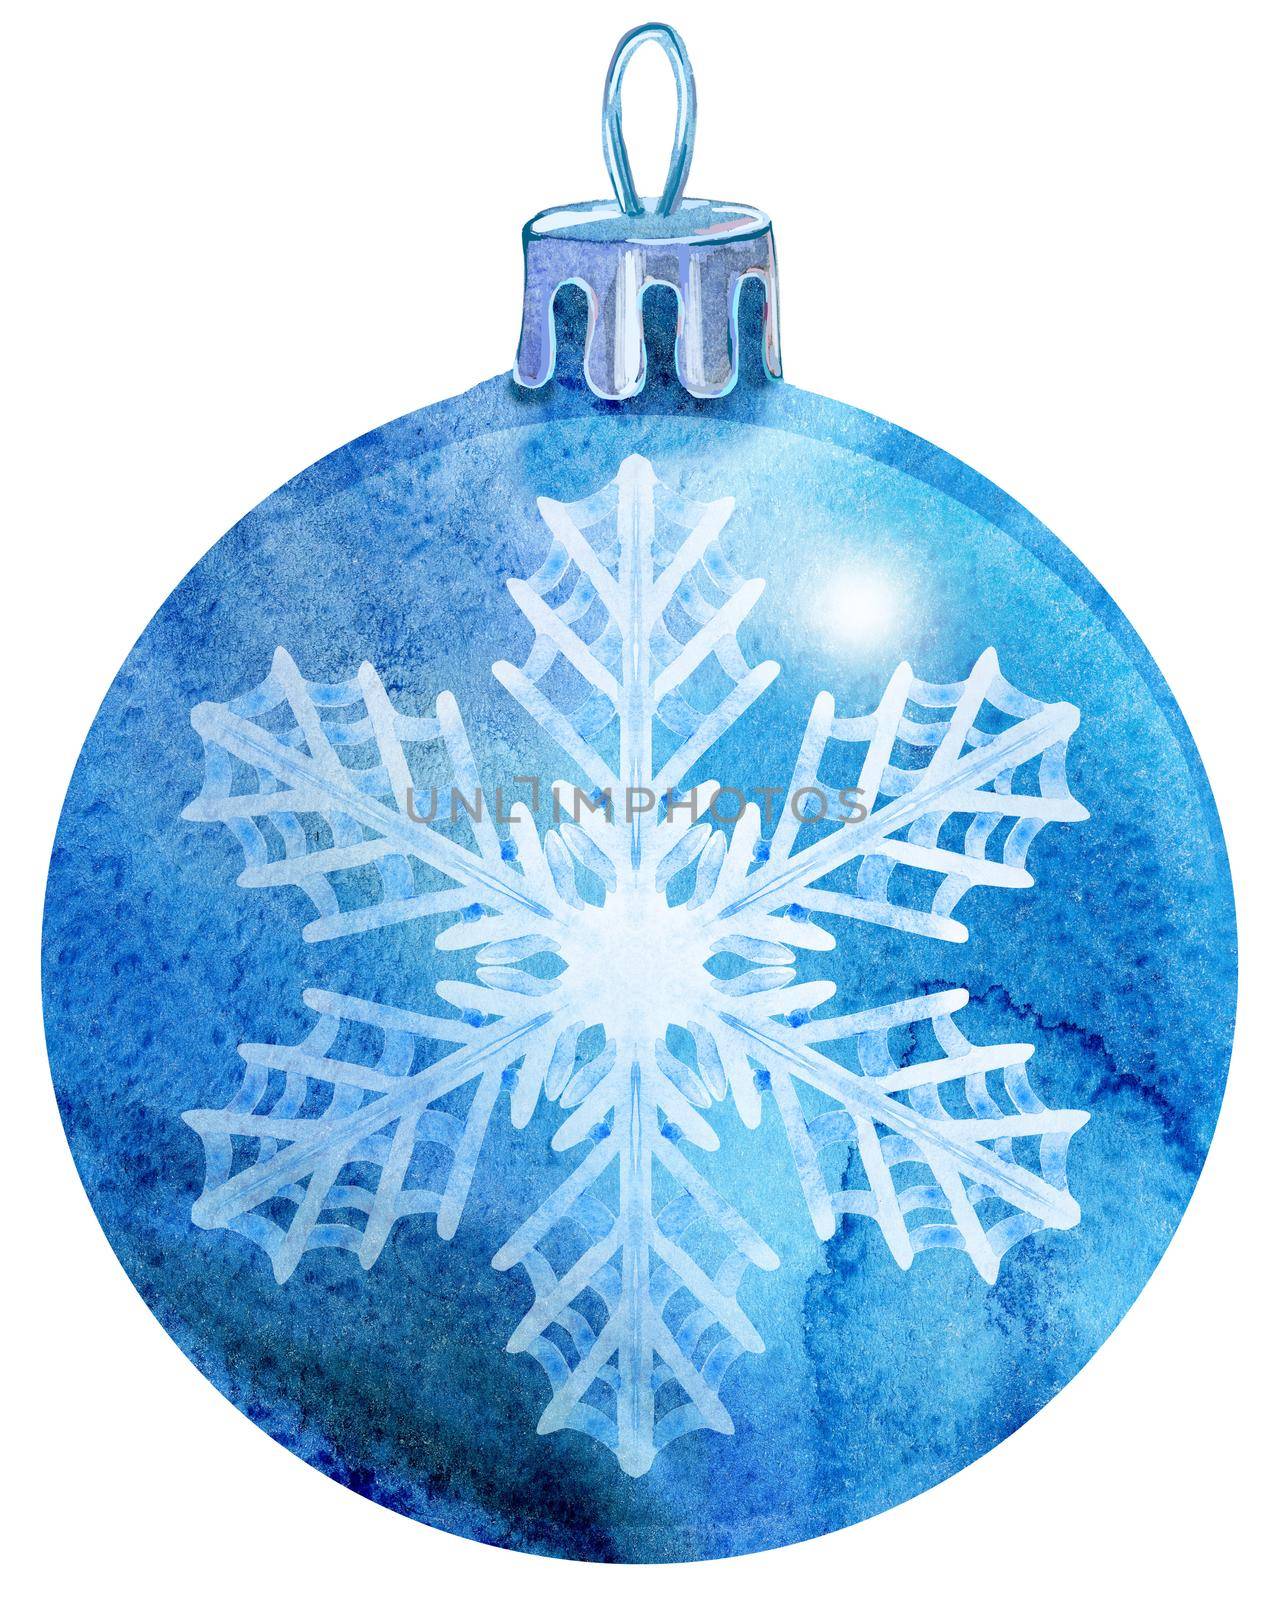 Watercolor Christmas blue ball with snowlake isolated on a white background.